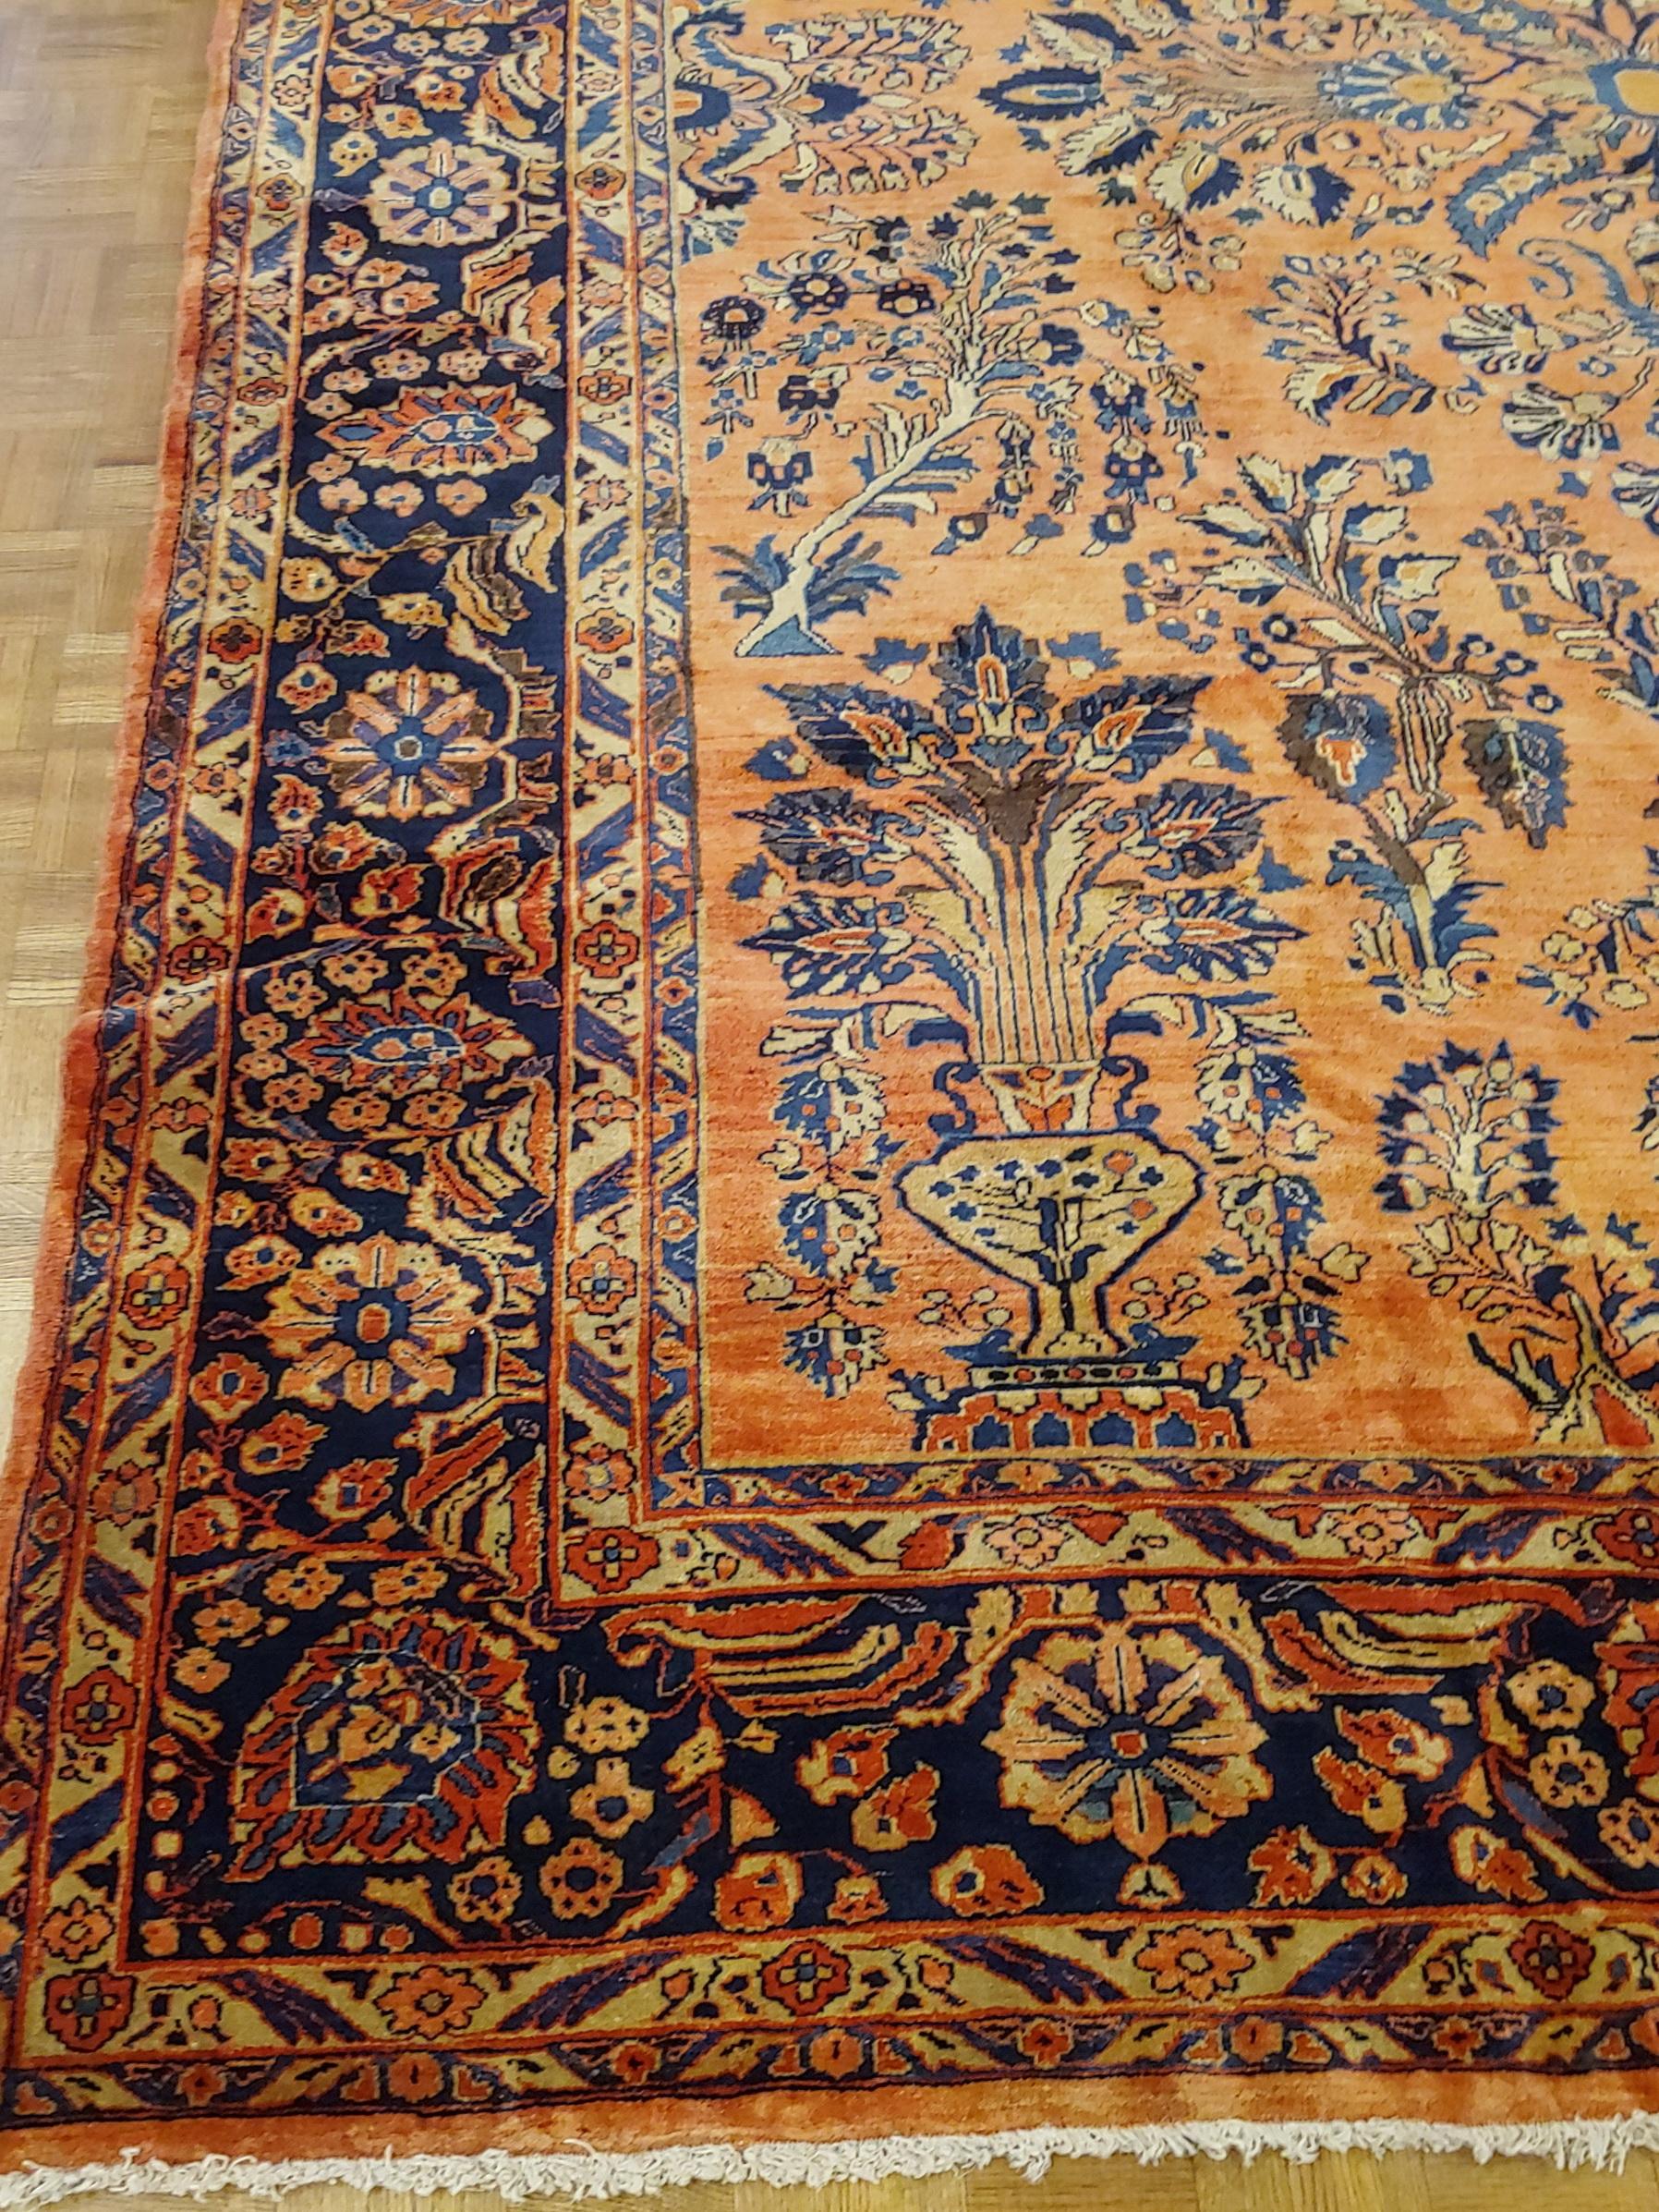 Persian Sarouk with an all-over field design with a rust background and a navy border. The field is decorated with vines, tendrills and flowers in light blue, gold and teal. The wool is so soft that it feels like silk. It is 9 x 11-9, circa 1920.